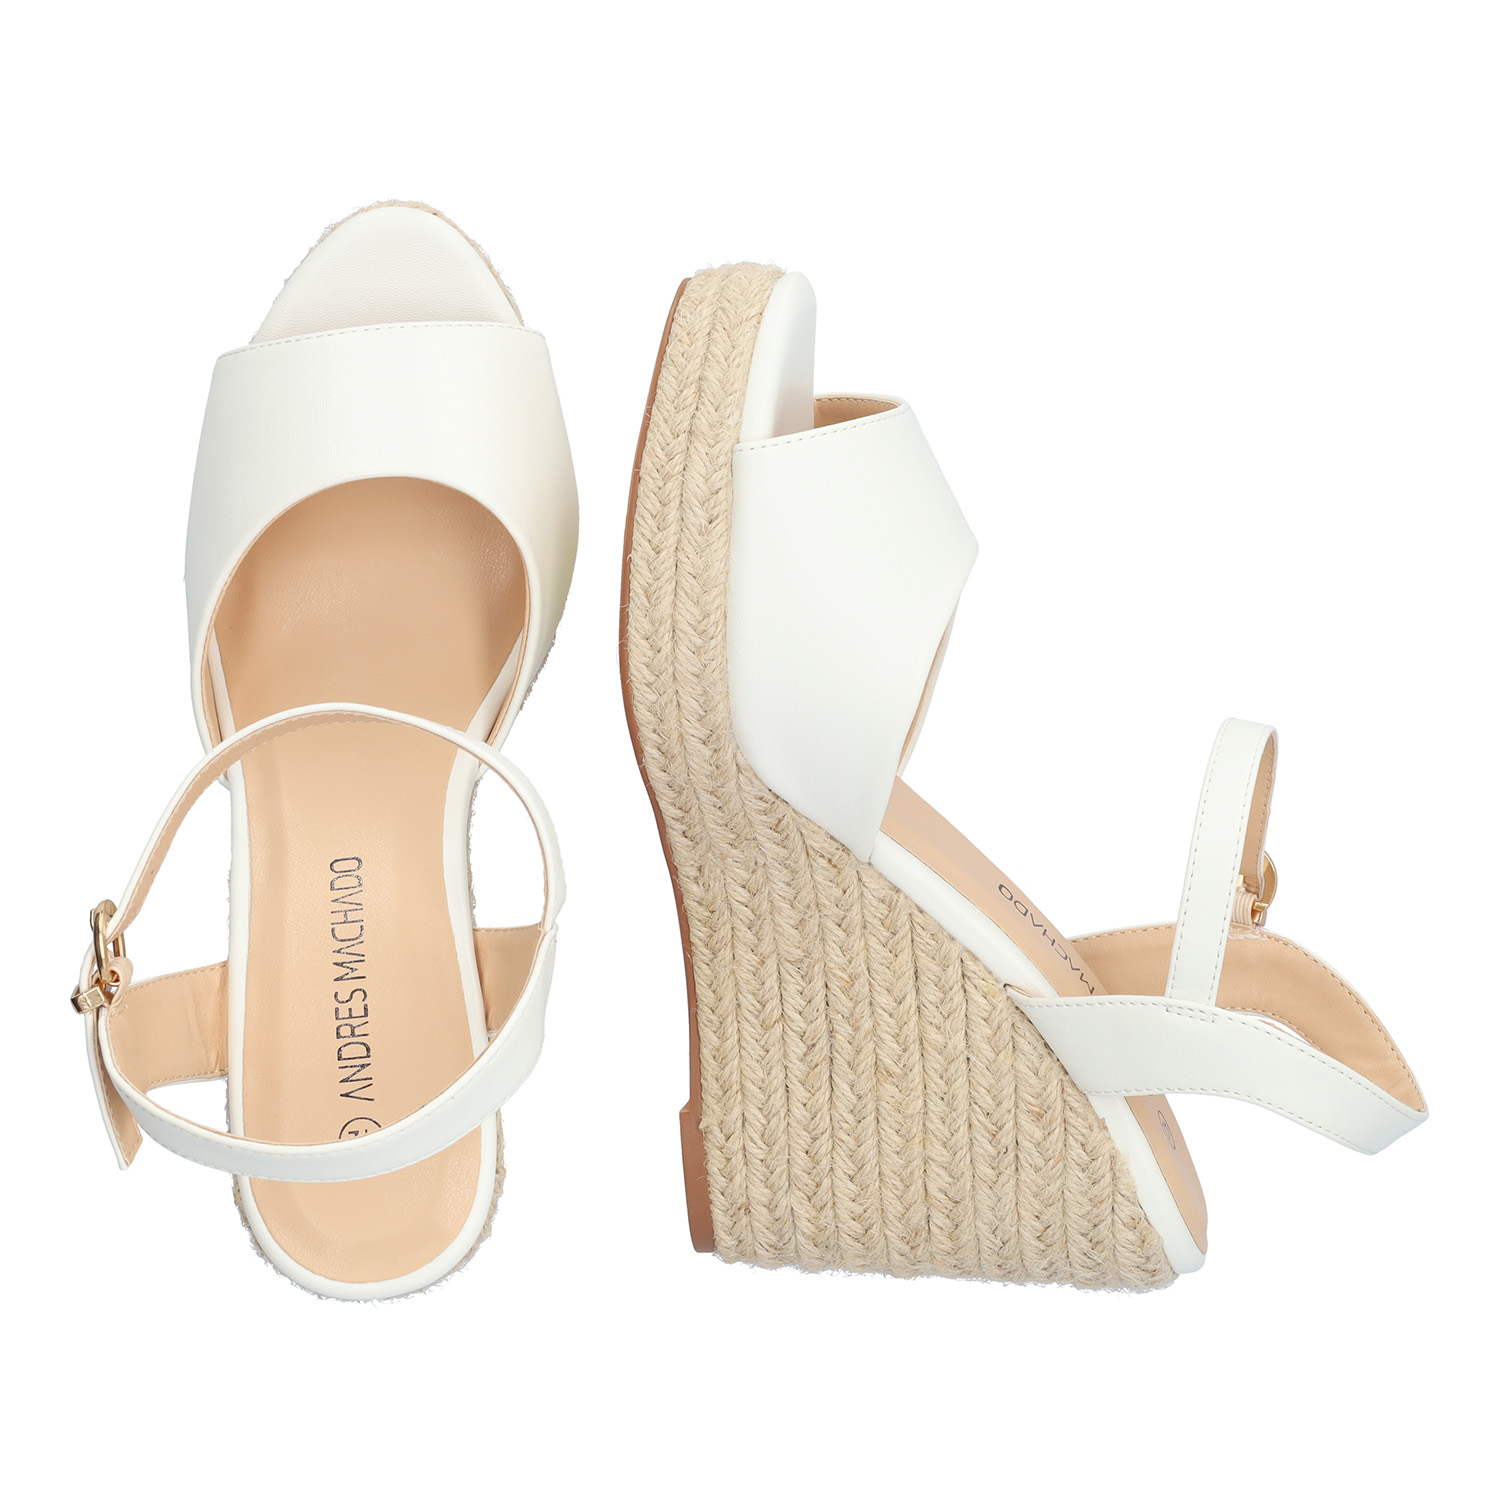 White soft fabric sandal with a jute wedge 